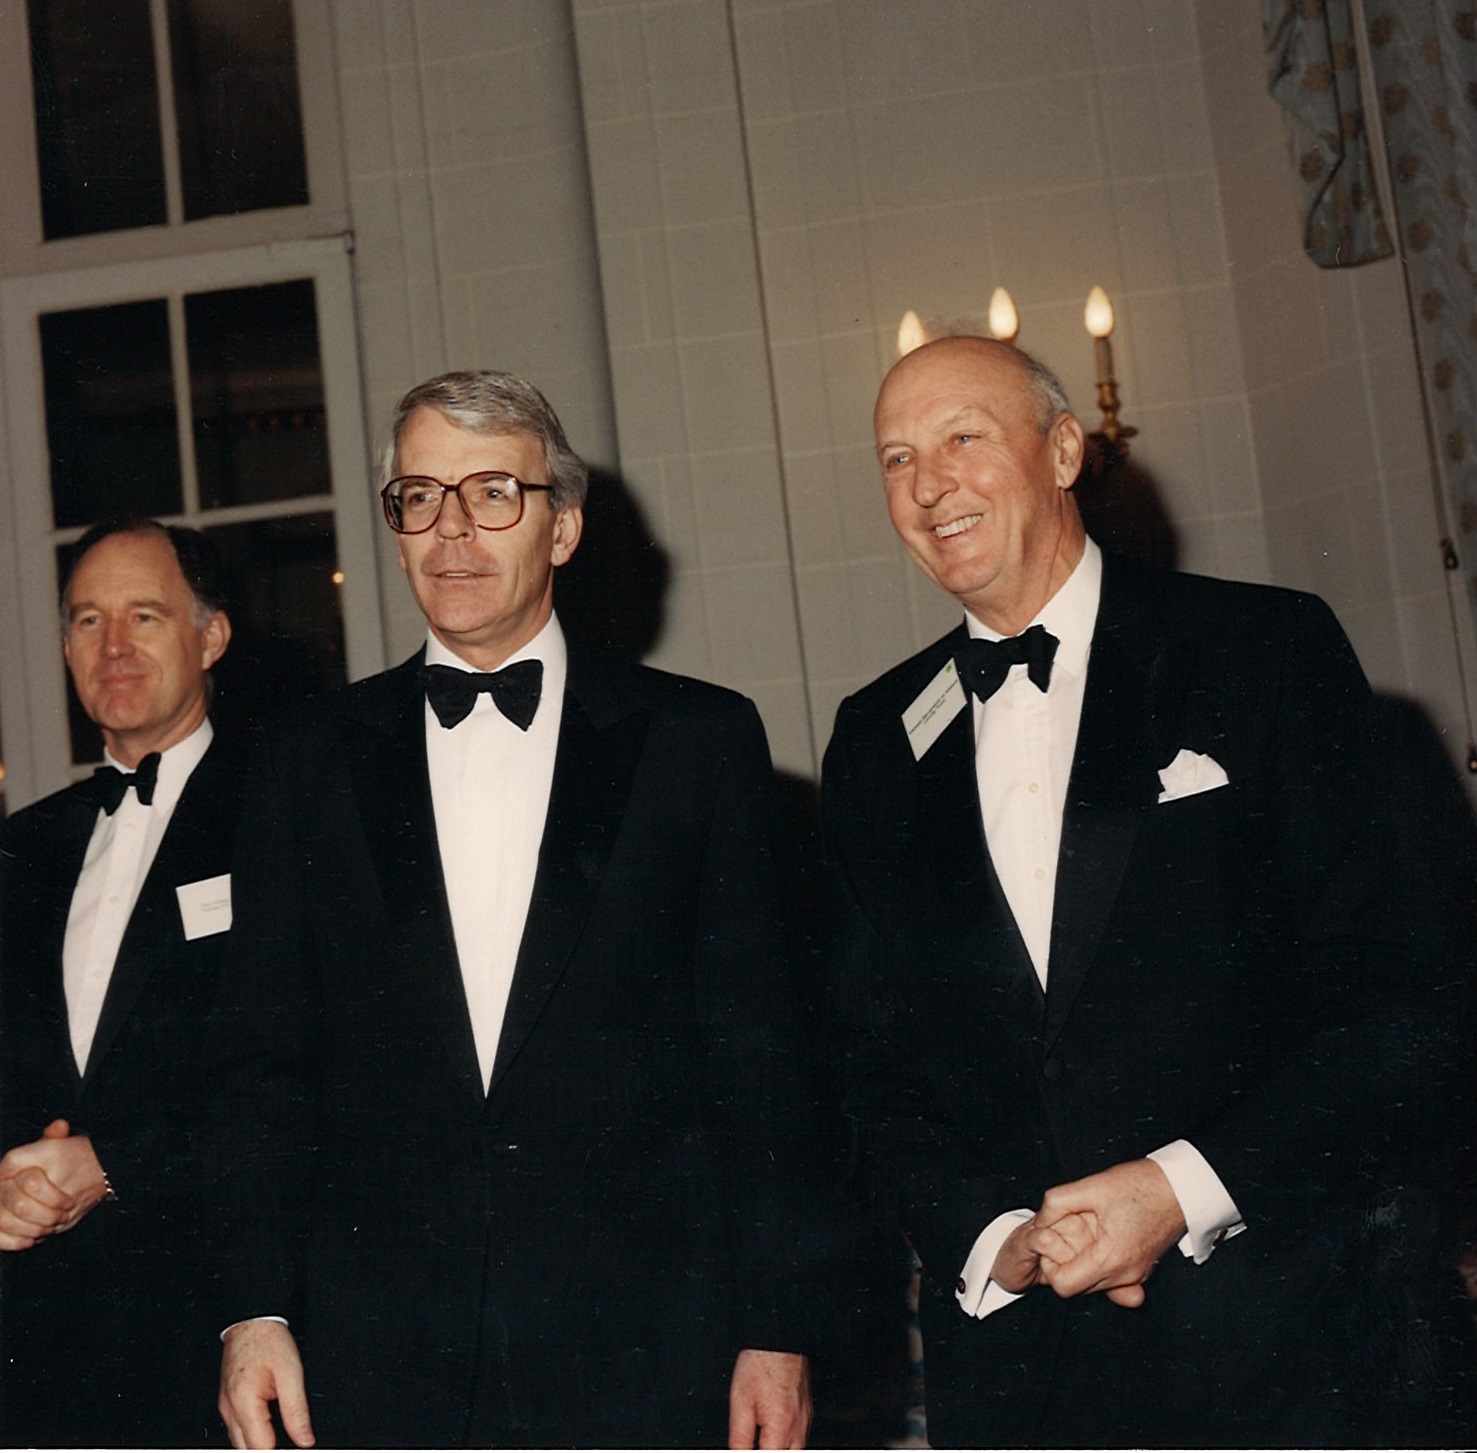 Viscount Montgomery with Sir John Major at Canning House 1994 Gala Dinner